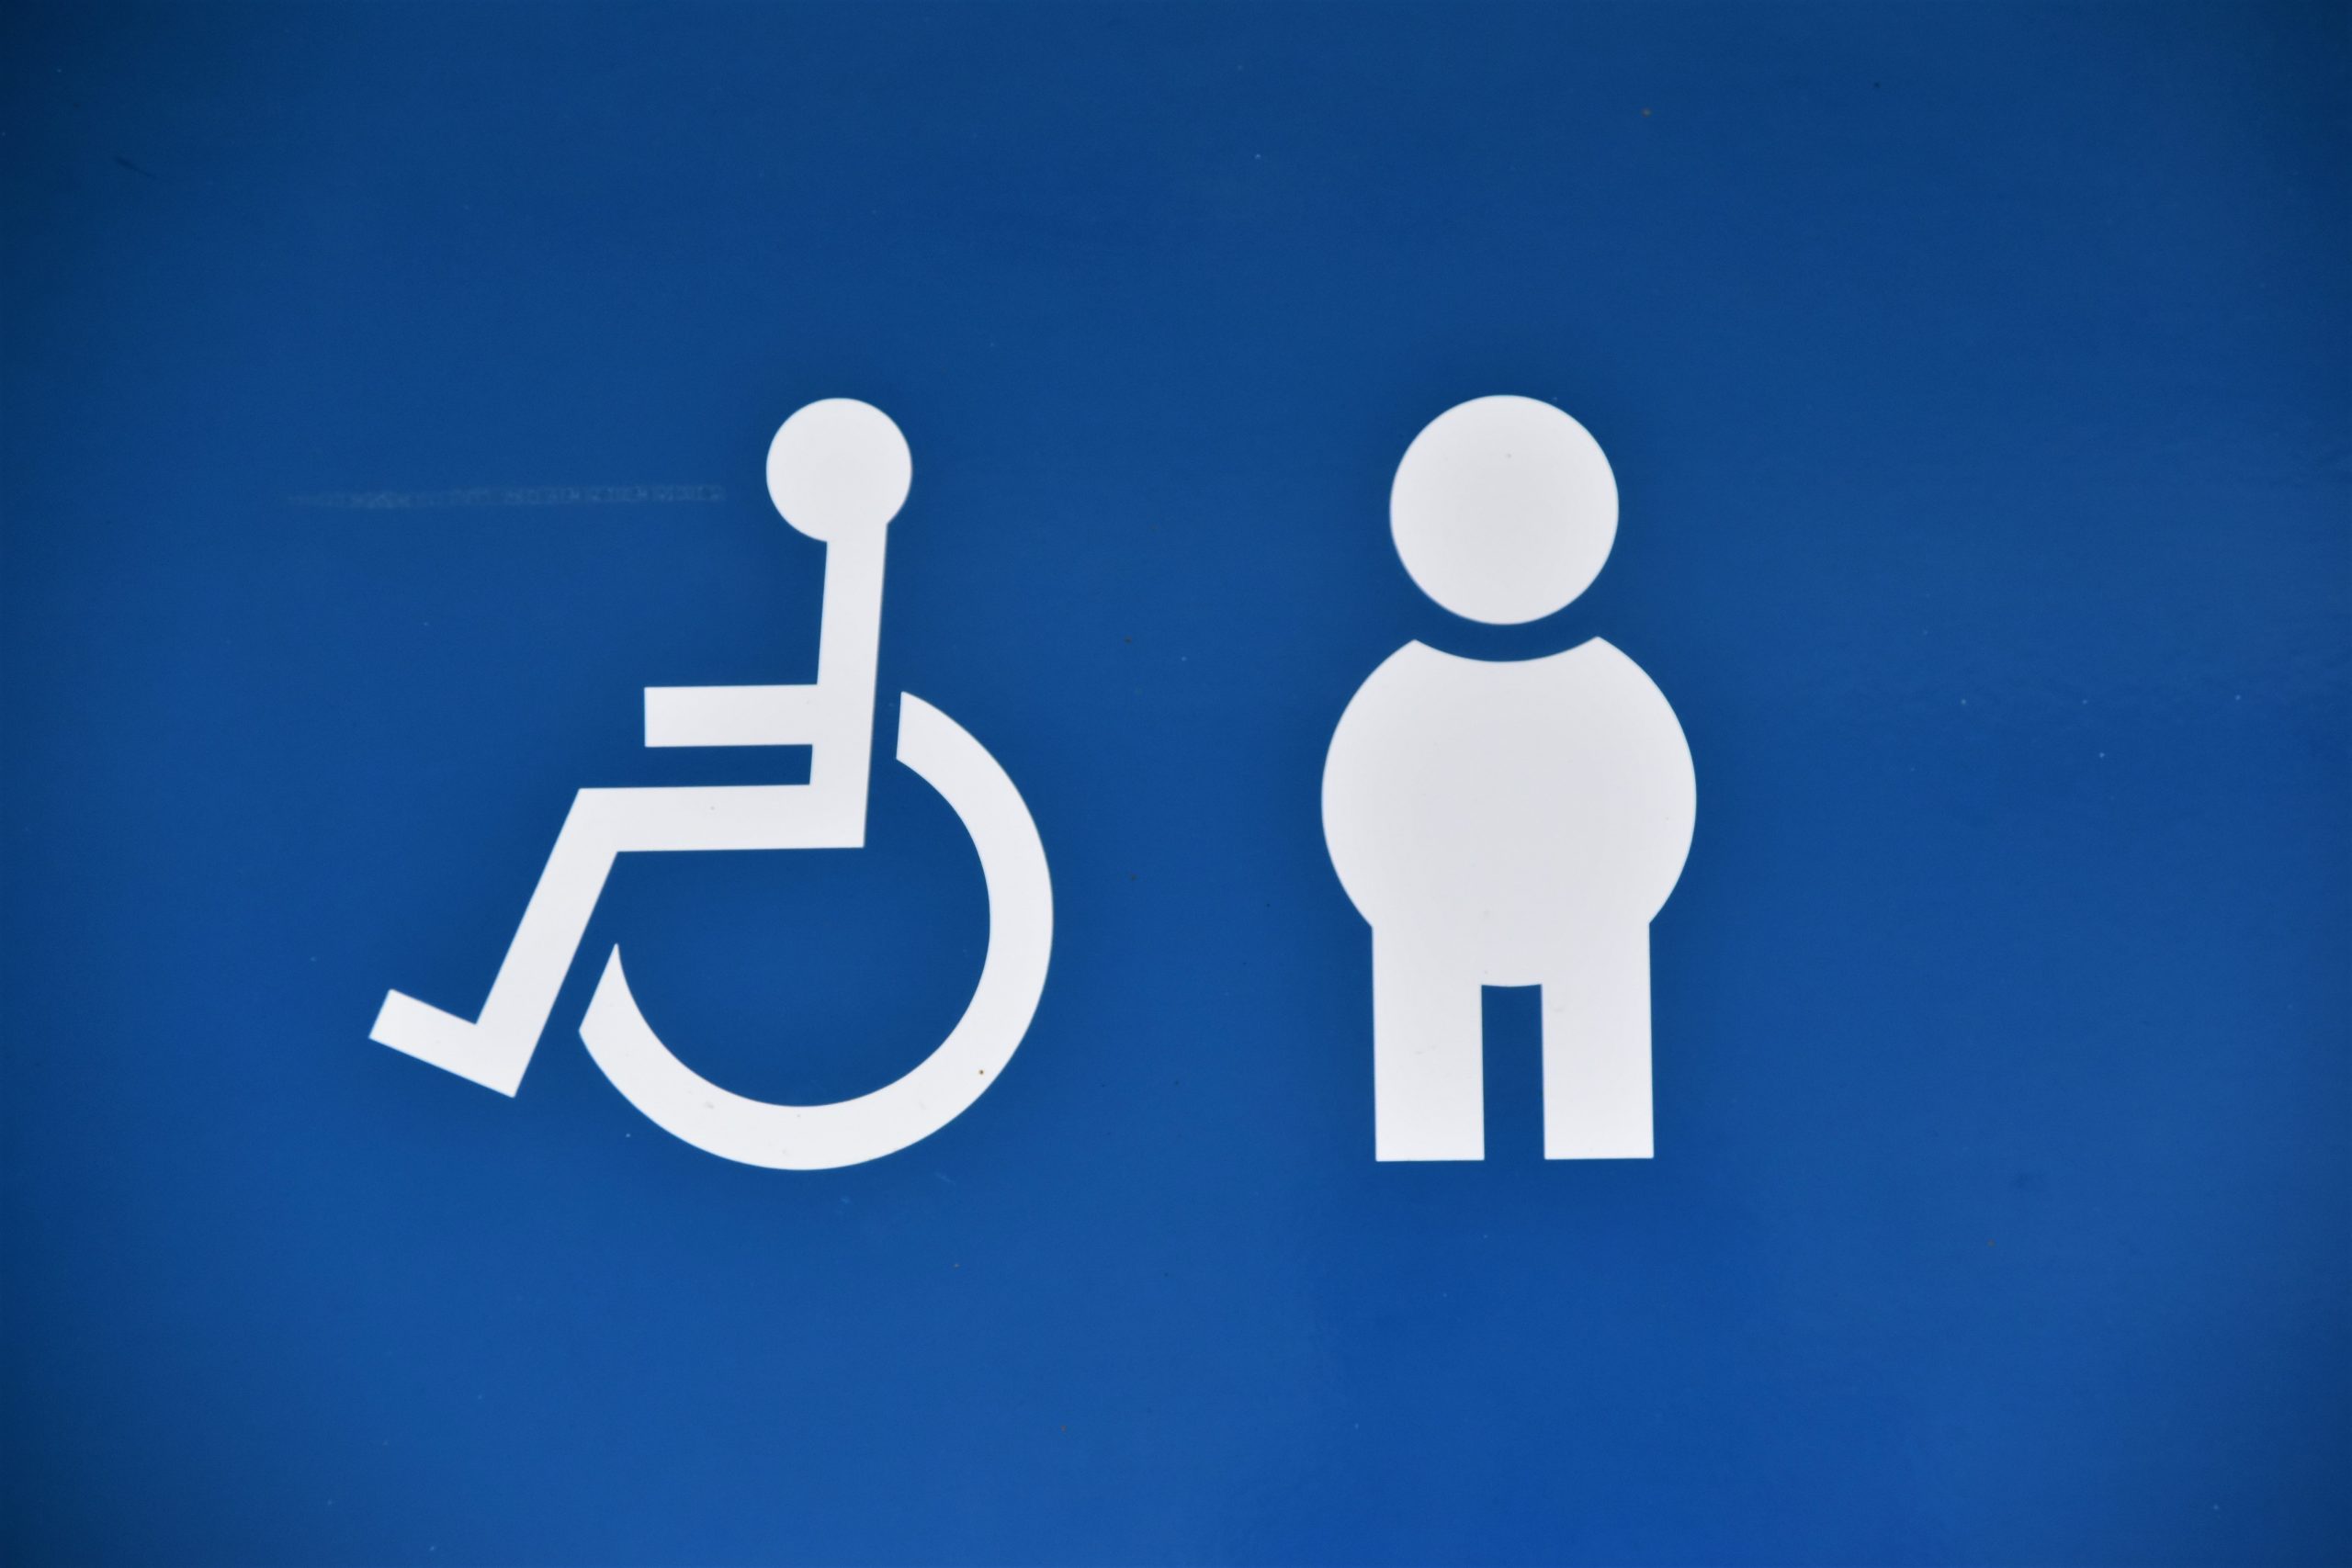 A blue background shows a white disabled symbol and a stick figure standing to represent hidden disabilities.